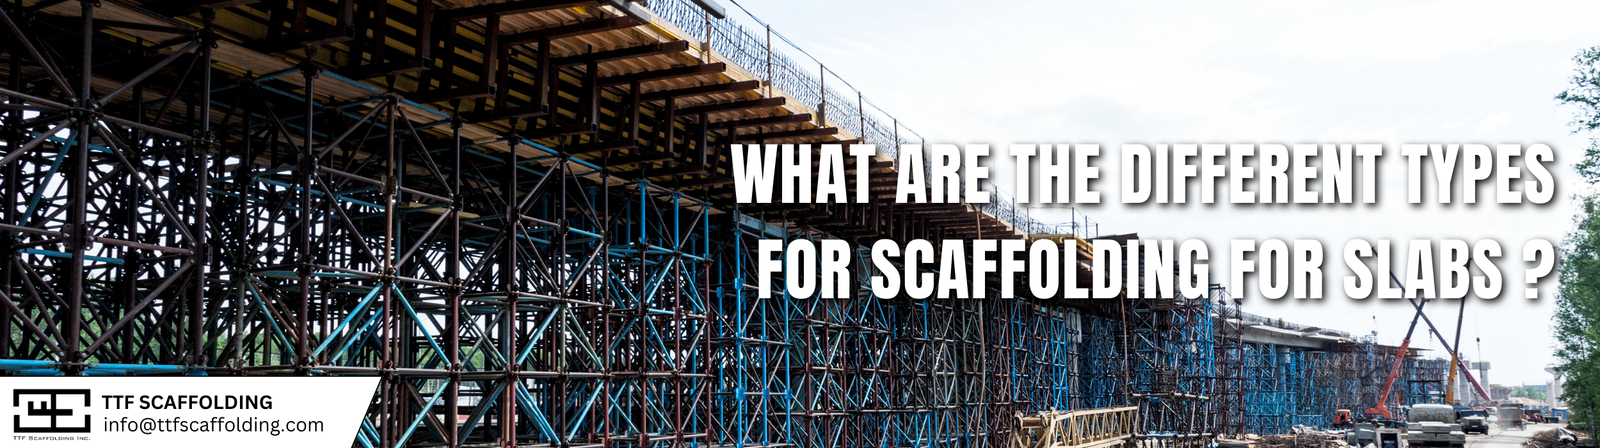 What different types of scaffolding for slabs?